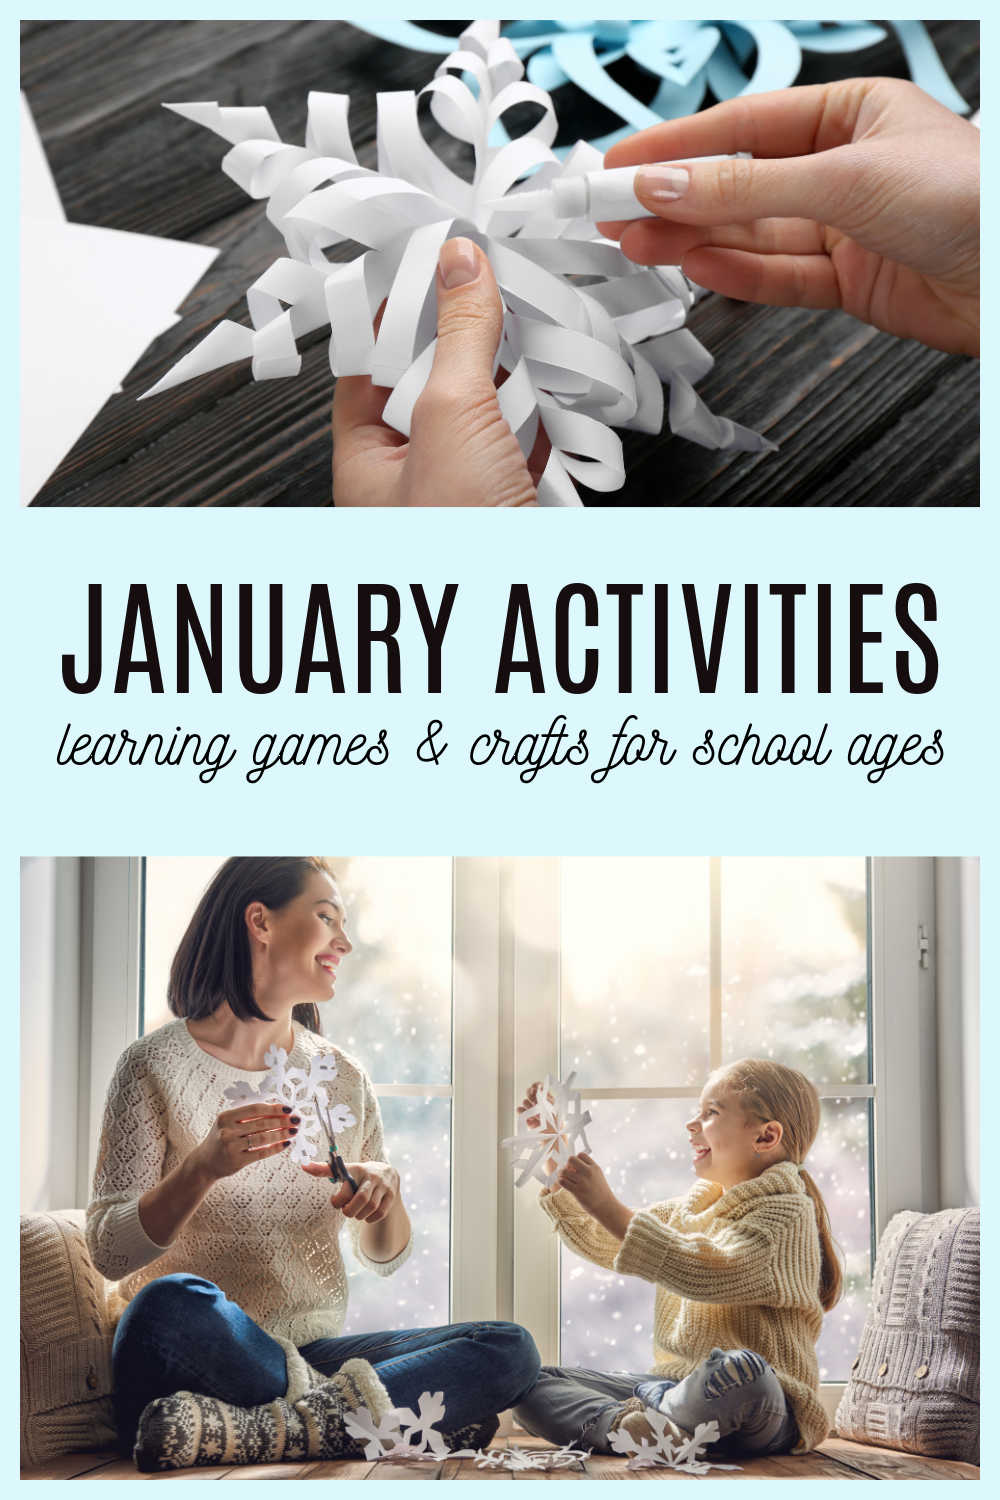 january activities for school ages